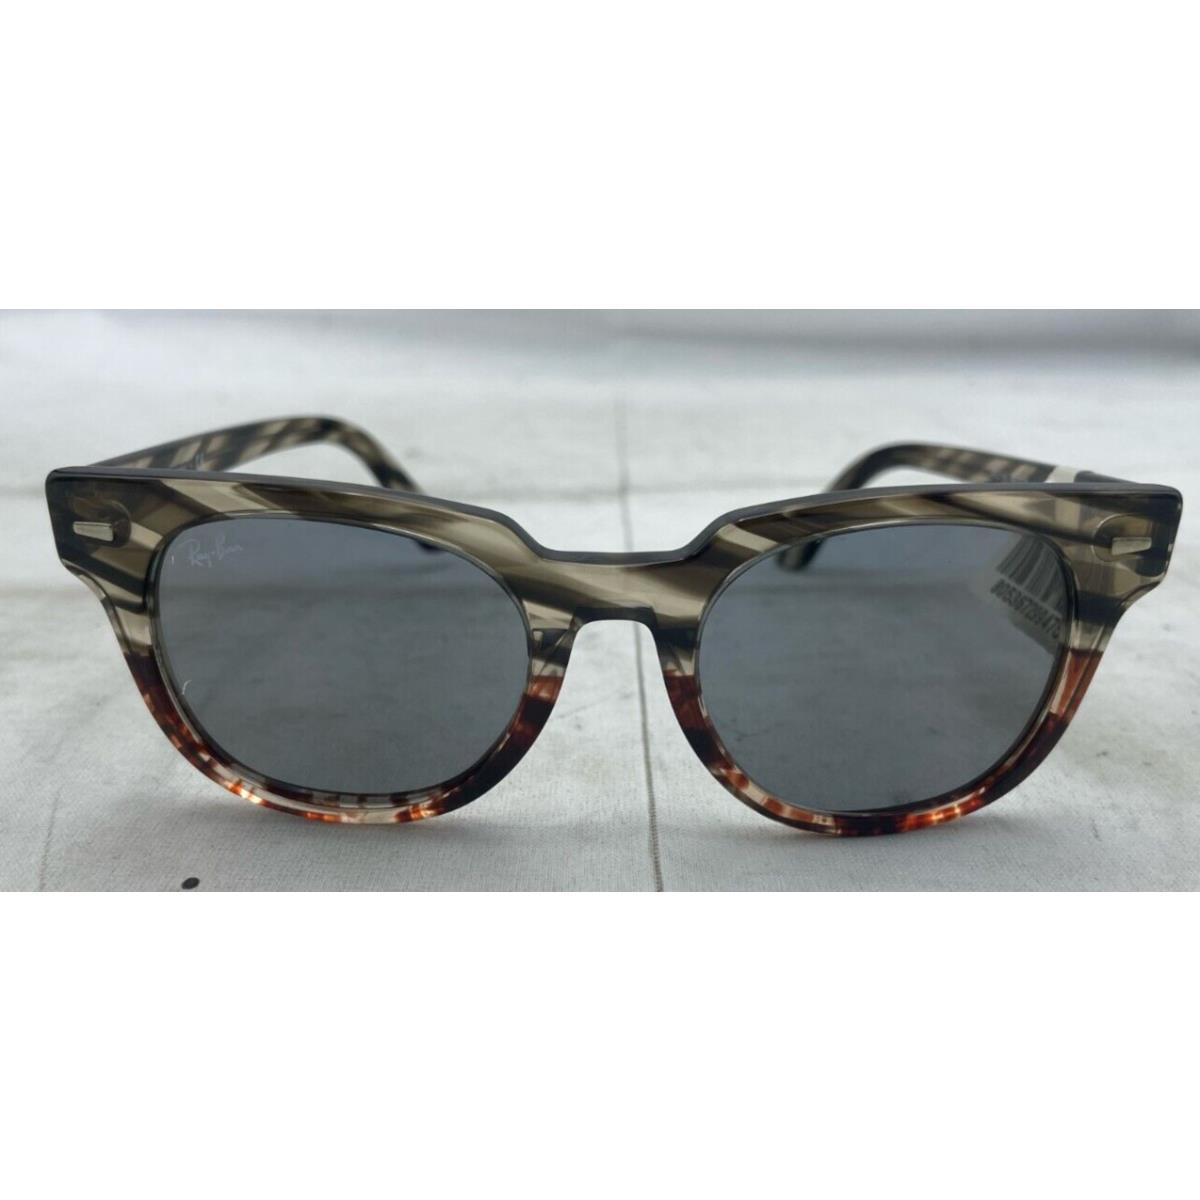 Ray-ban Meteor Sunglasses RB2168 1254/Y5 Grey Brown W/ Tags NO Case - Frame: Brown, Lens: Gray